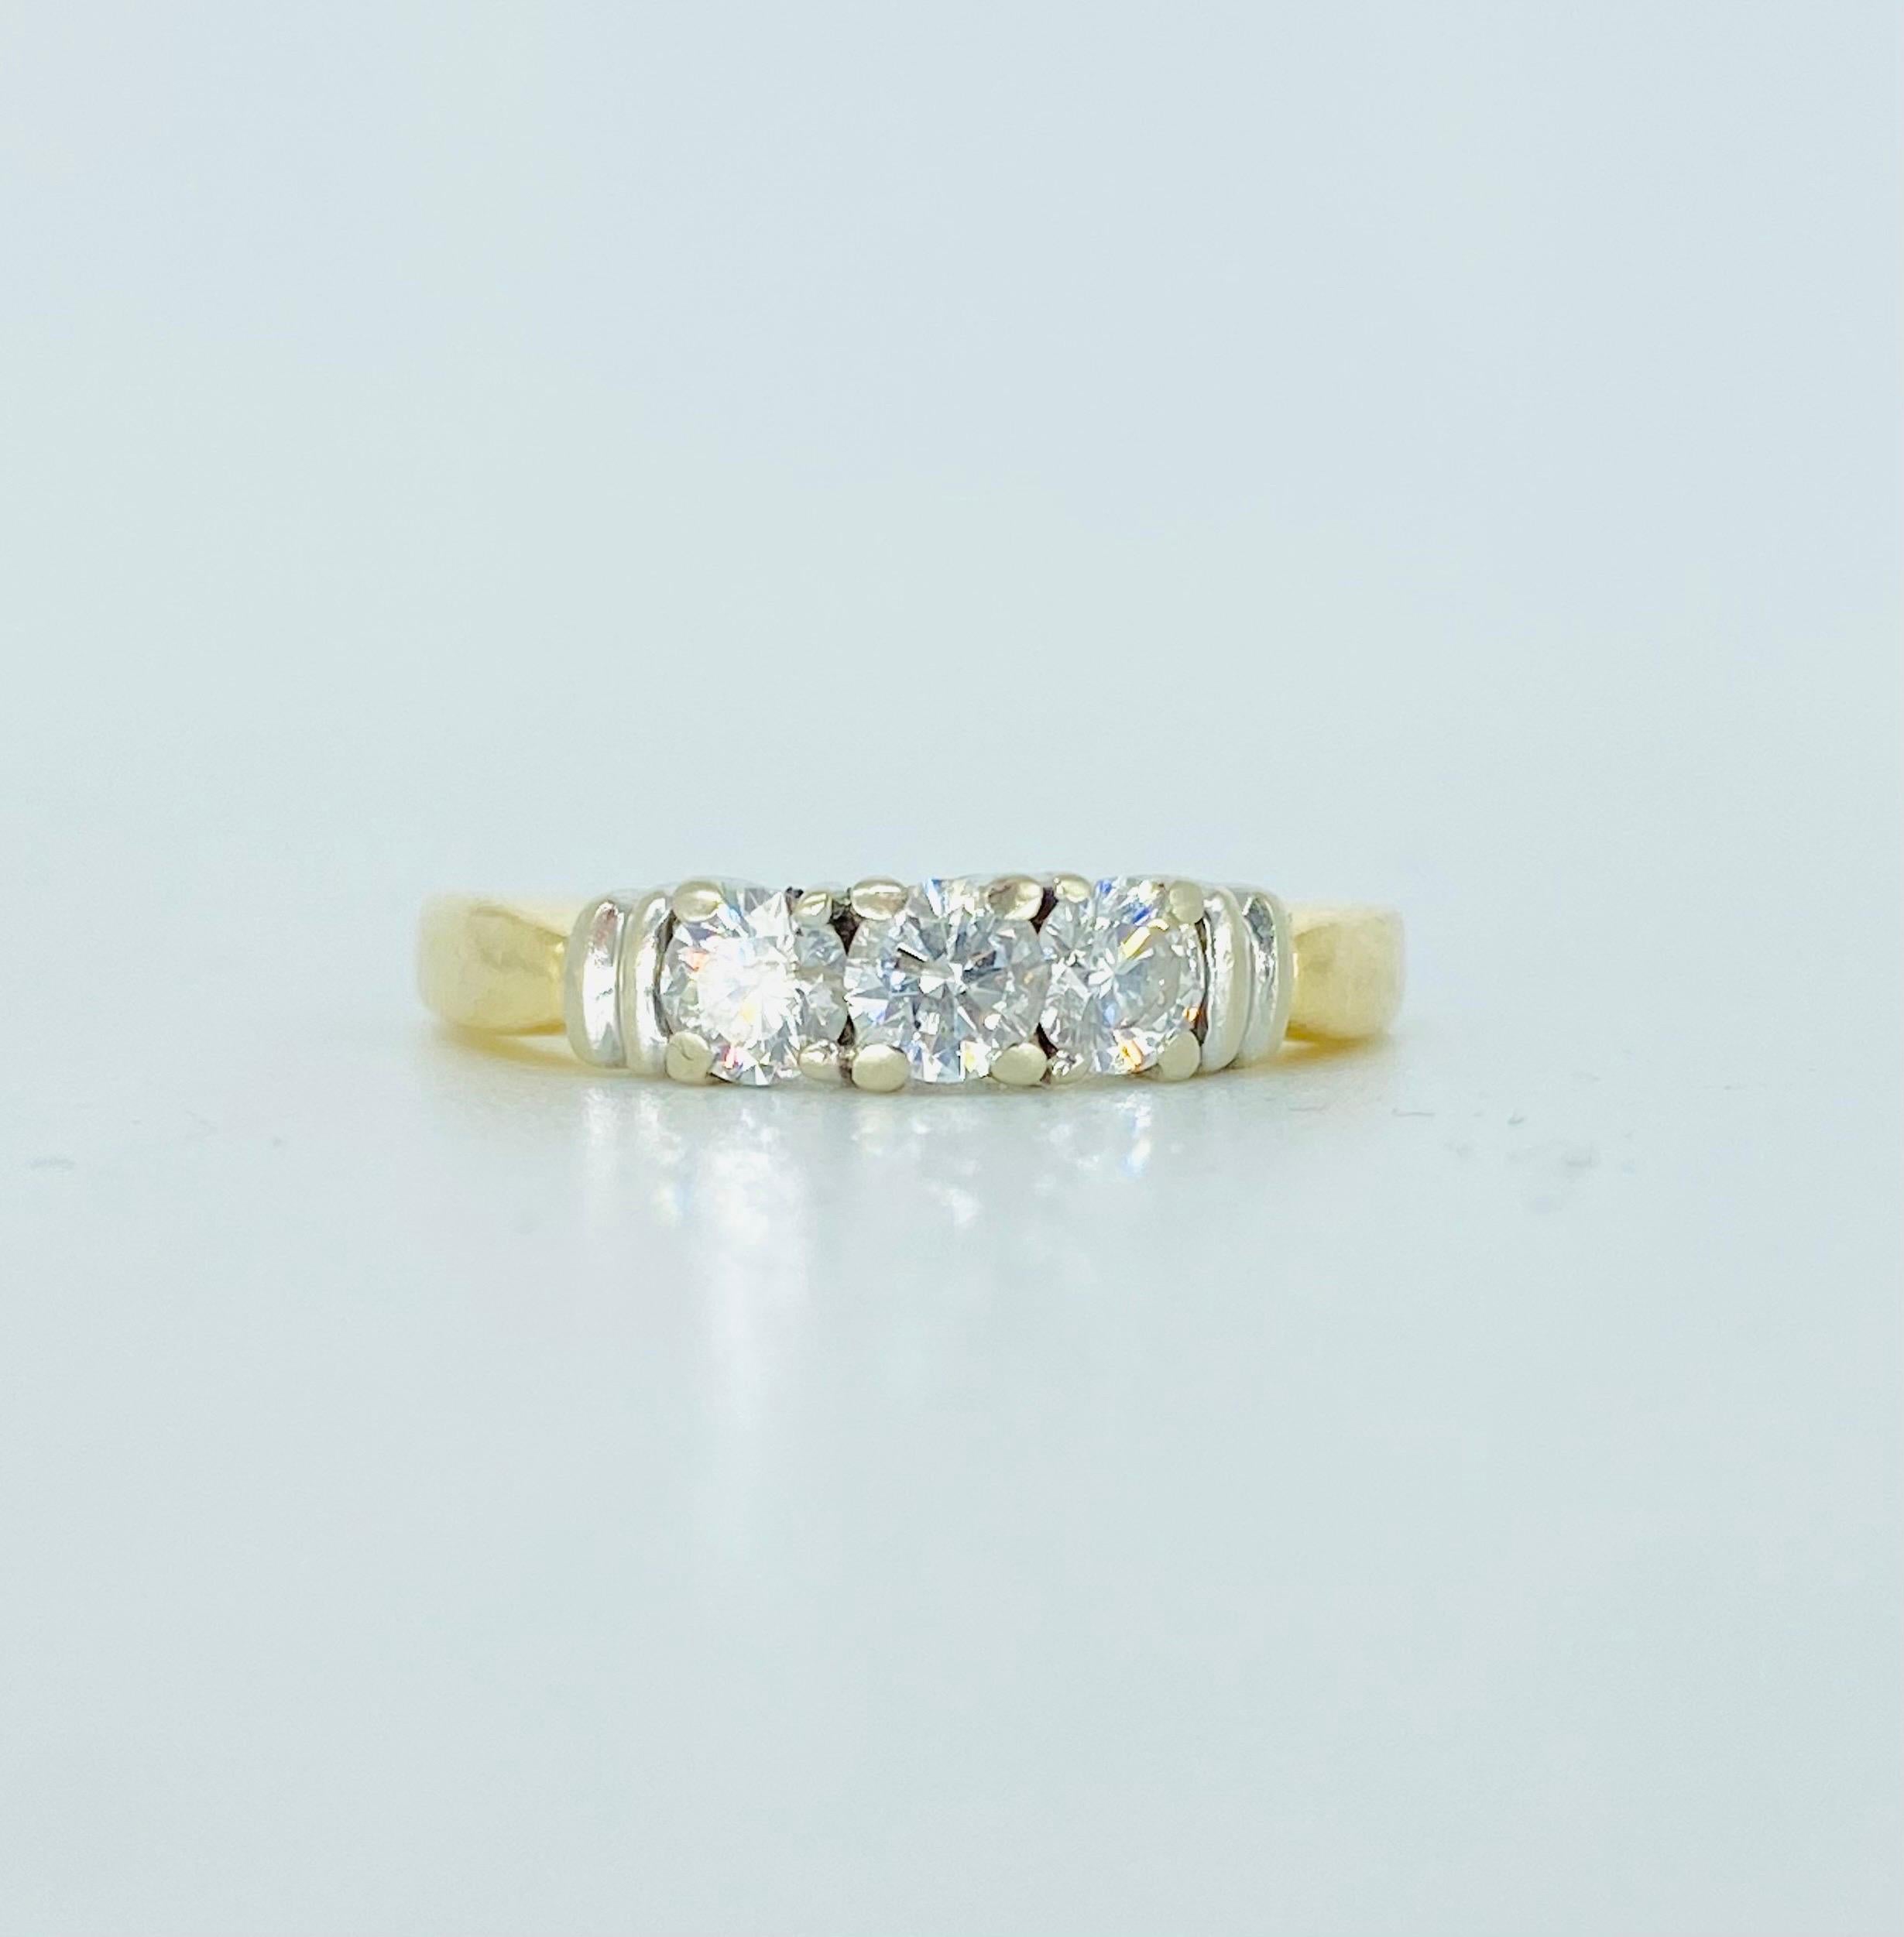 Vintage 3-Stone 0.60 Carat Diamond Ring 14k Gold. The ring features 3x round diamonds for a total of 0.60 carat. The diamonds are VS/SI clarity. The ring is a size 5.5 and weights 3.4 grams 14k gold.